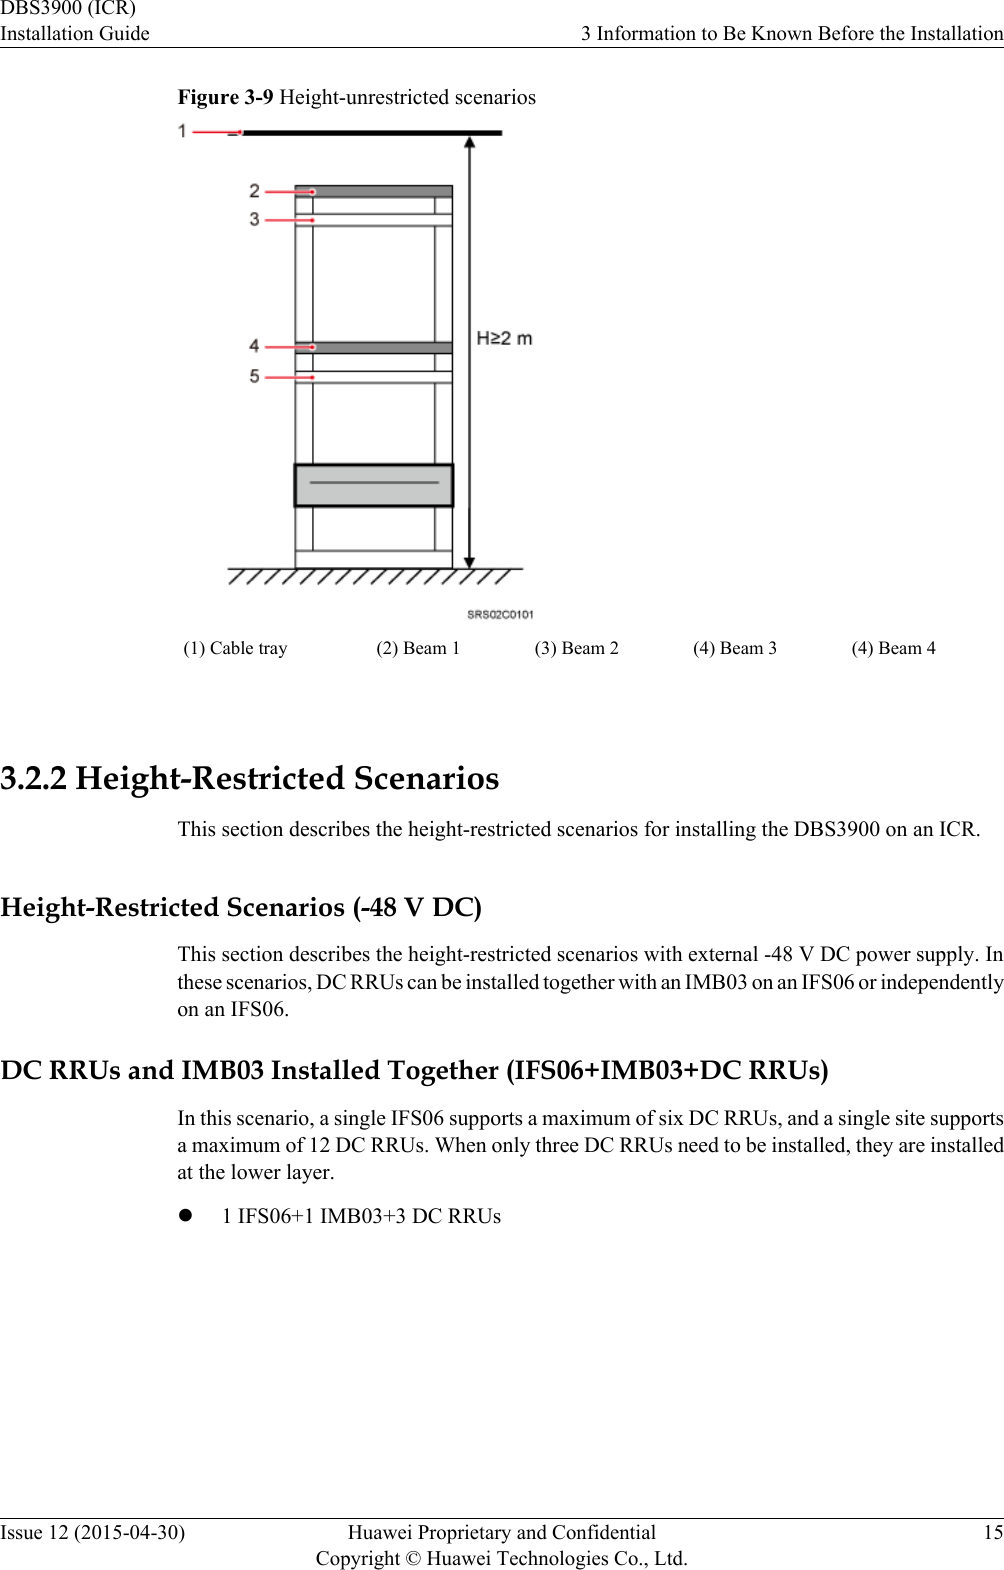 Figure 3-9 Height-unrestricted scenarios(1) Cable tray (2) Beam 1 (3) Beam 2 (4) Beam 3 (4) Beam 4 3.2.2 Height-Restricted ScenariosThis section describes the height-restricted scenarios for installing the DBS3900 on an ICR.Height-Restricted Scenarios (-48 V DC)This section describes the height-restricted scenarios with external -48 V DC power supply. Inthese scenarios, DC RRUs can be installed together with an IMB03 on an IFS06 or independentlyon an IFS06.DC RRUs and IMB03 Installed Together (IFS06+IMB03+DC RRUs)In this scenario, a single IFS06 supports a maximum of six DC RRUs, and a single site supportsa maximum of 12 DC RRUs. When only three DC RRUs need to be installed, they are installedat the lower layer.l1 IFS06+1 IMB03+3 DC RRUsDBS3900 (ICR)Installation Guide 3 Information to Be Known Before the InstallationIssue 12 (2015-04-30) Huawei Proprietary and ConfidentialCopyright © Huawei Technologies Co., Ltd.15